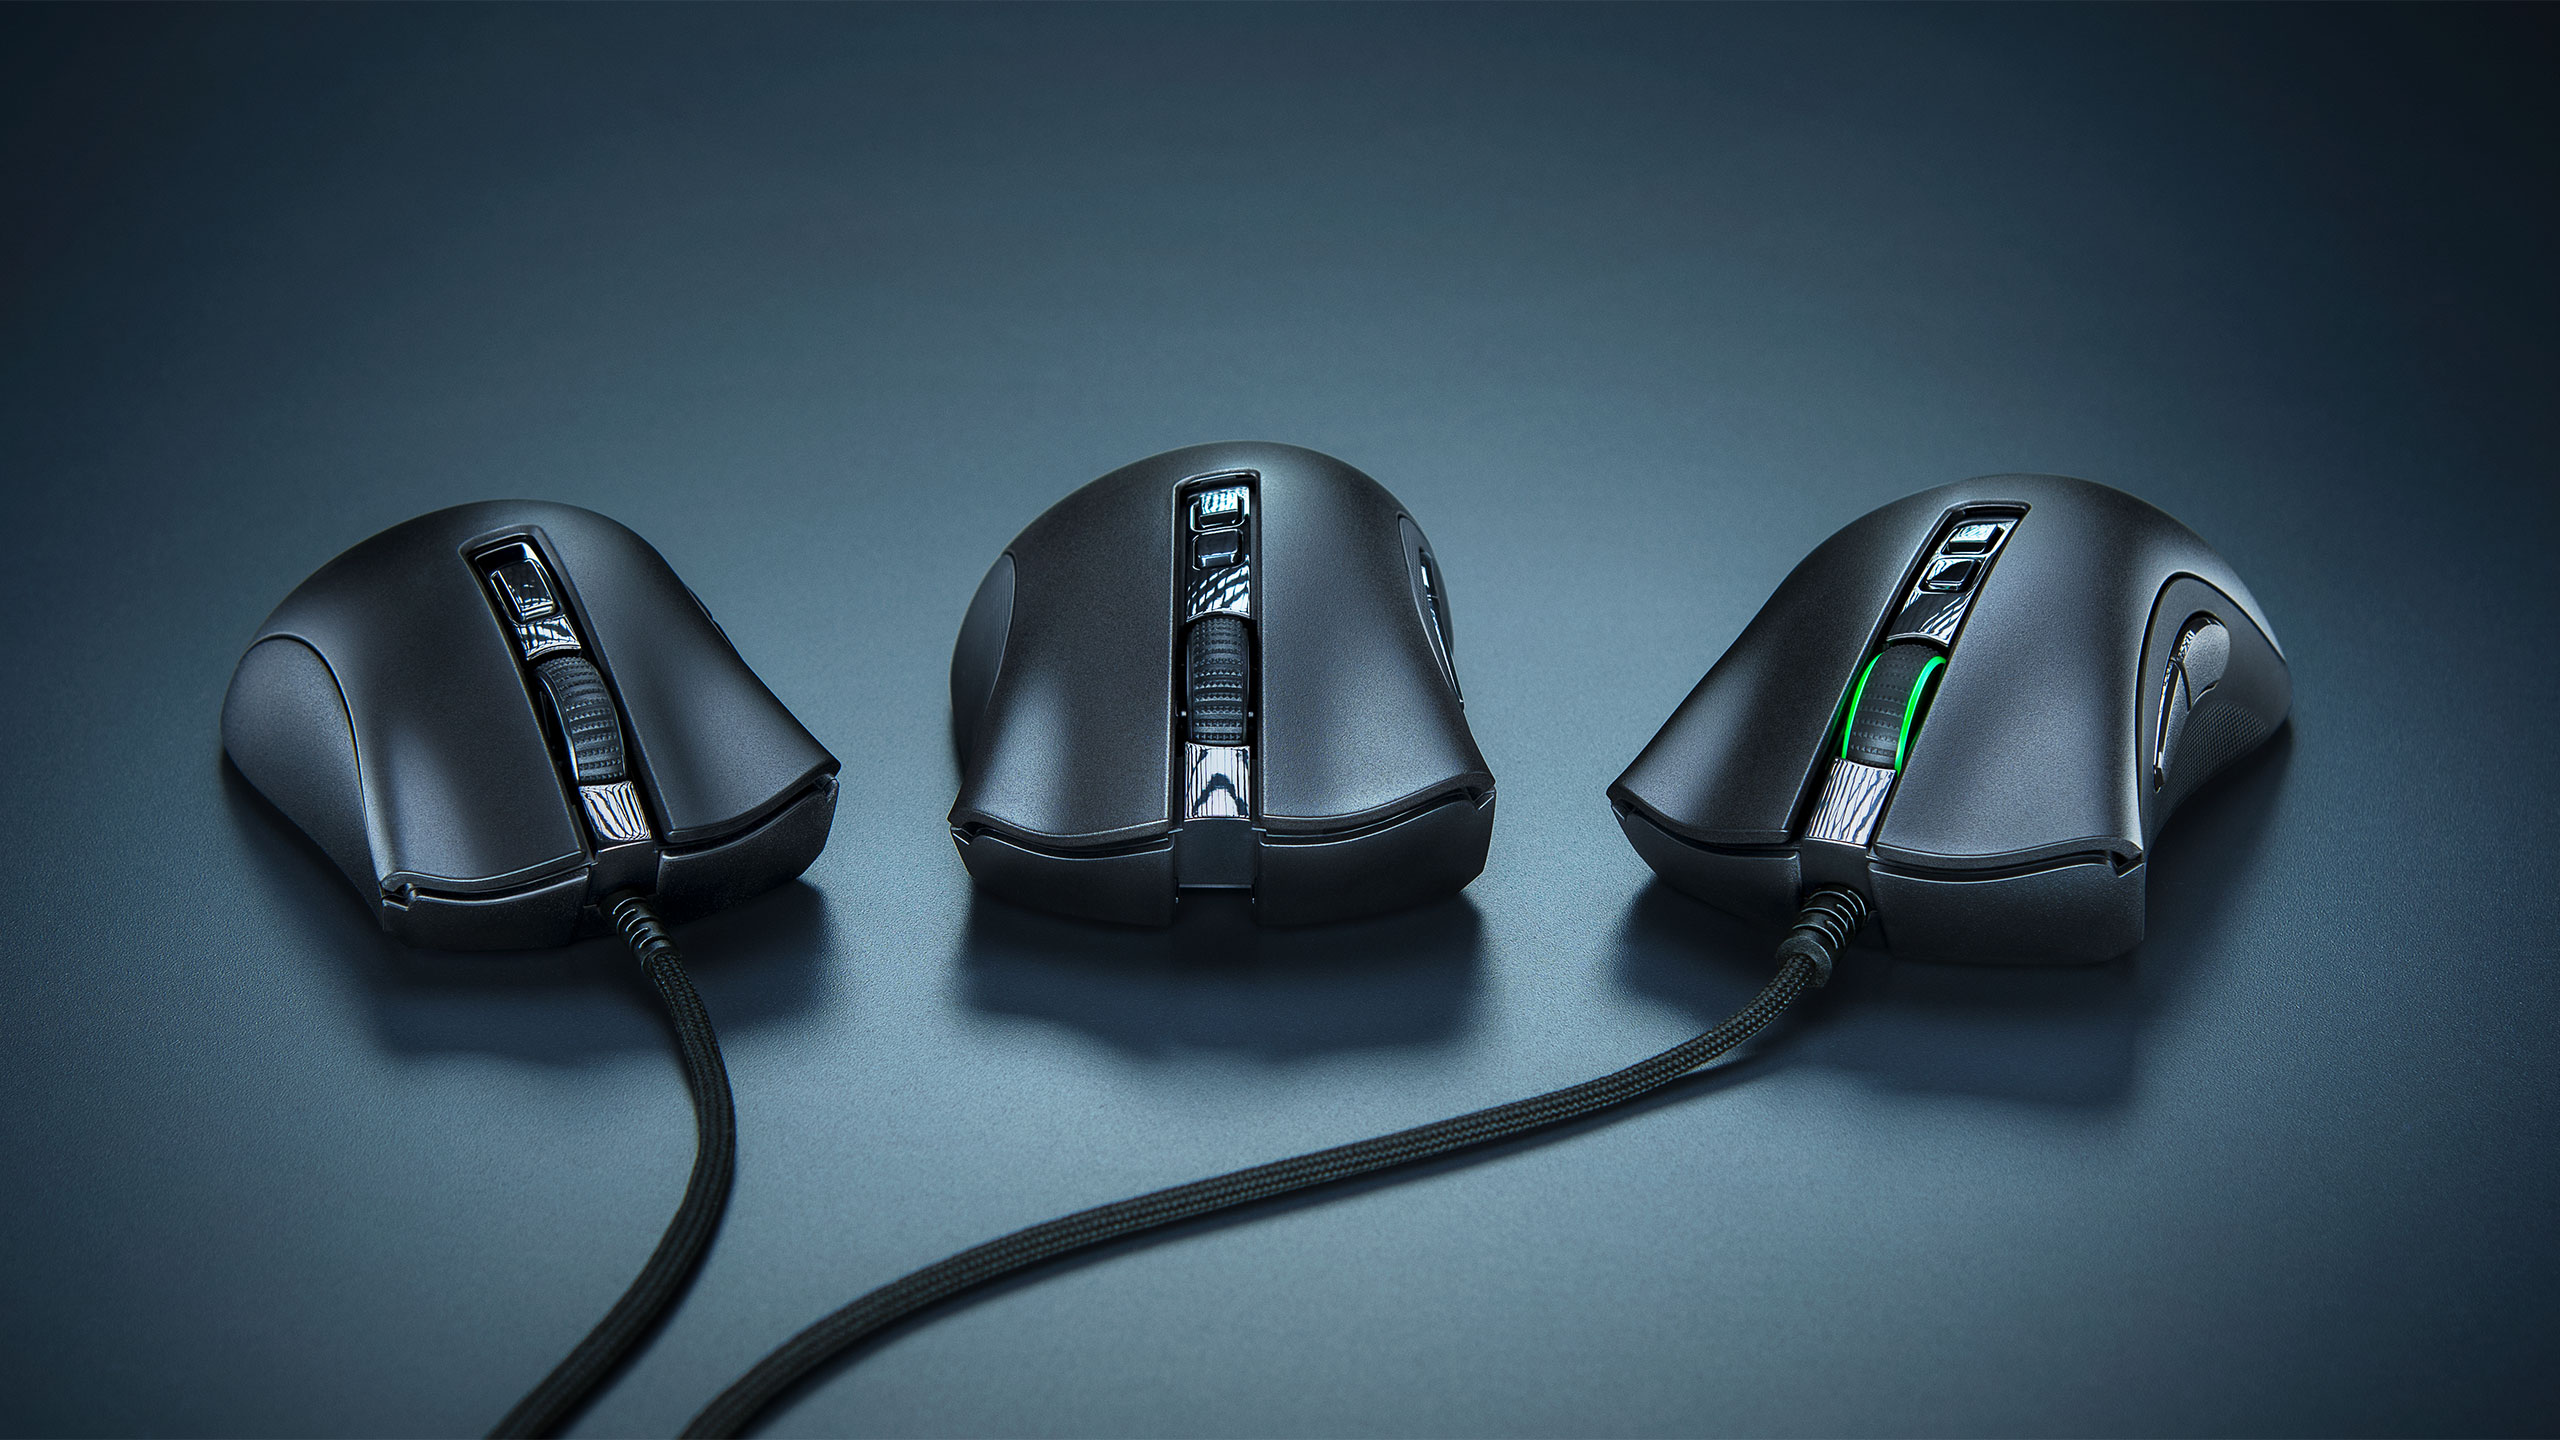 The new DeathAdder V2 Pro can be recharge using either is built-in USB-C port, or Razer's optional wireless charging cradle. (Photo: Razer)